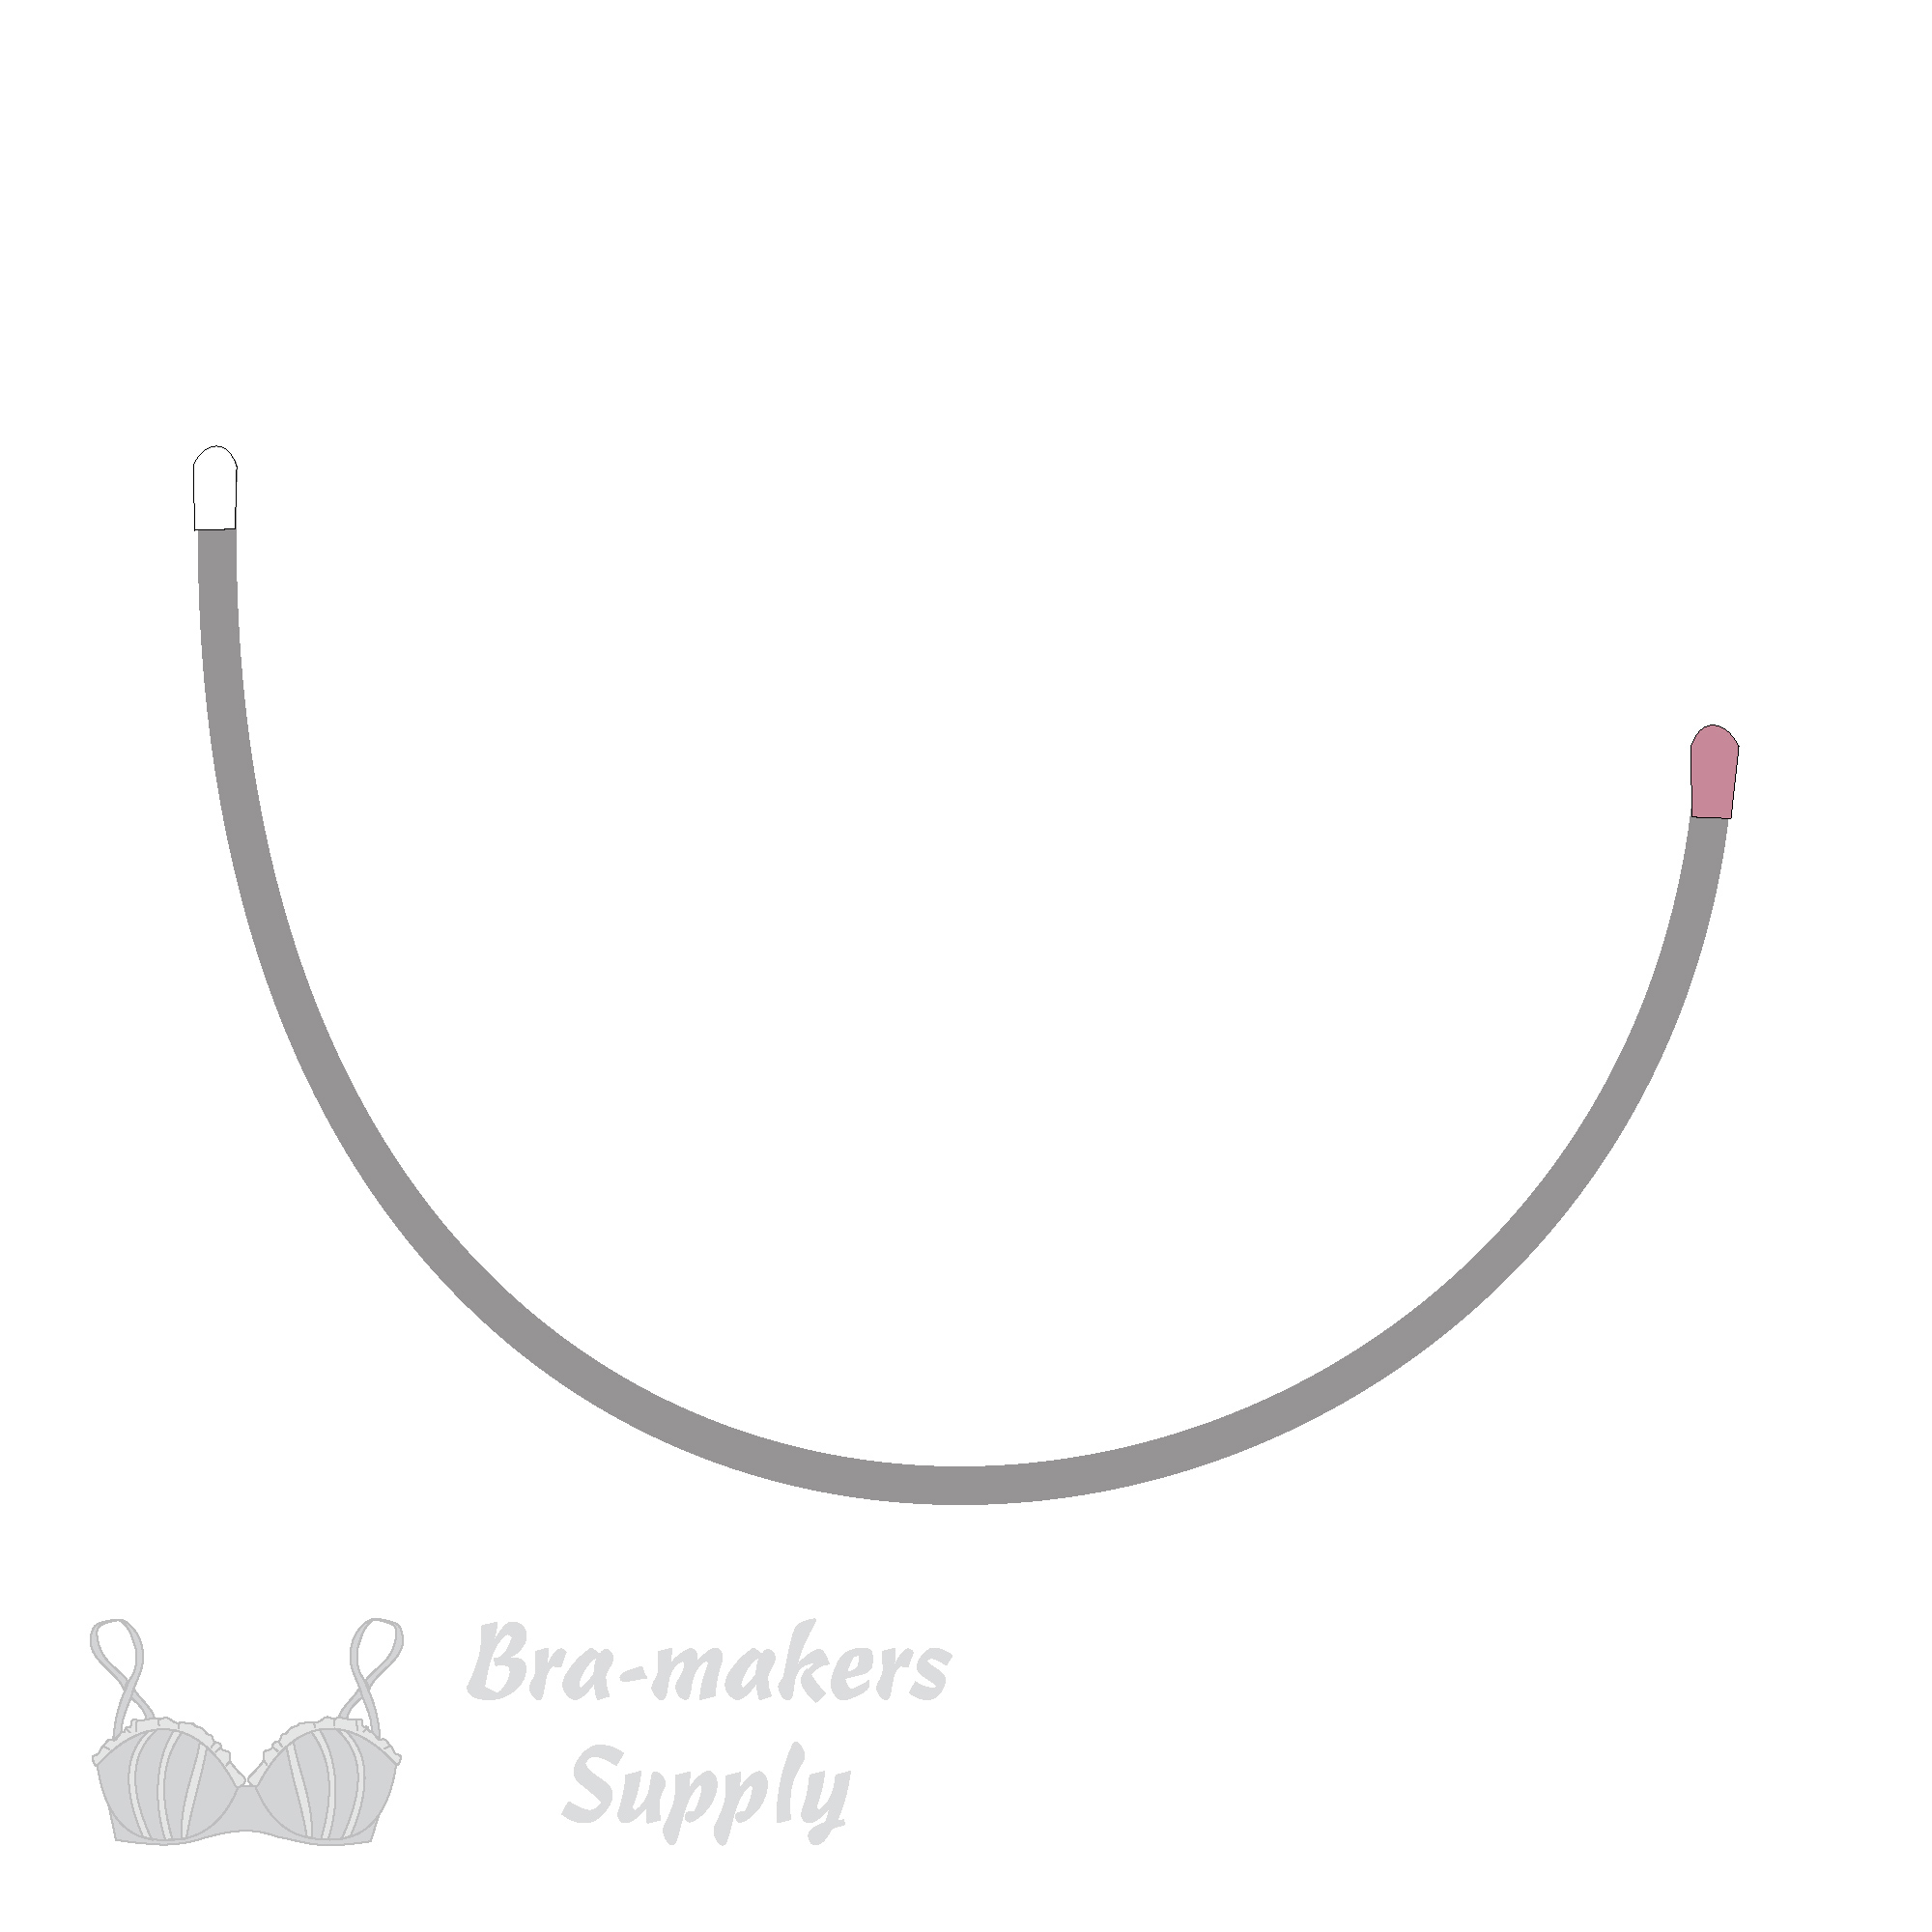  Porcelynne Carbon Steel Replacement Underwire Repair - Nylon  Coated - Heavy Gauge Sturdy Wire for Bras - Regular Wire Size 34-1 Pair -  See Pictures for Measurements and How to Order 